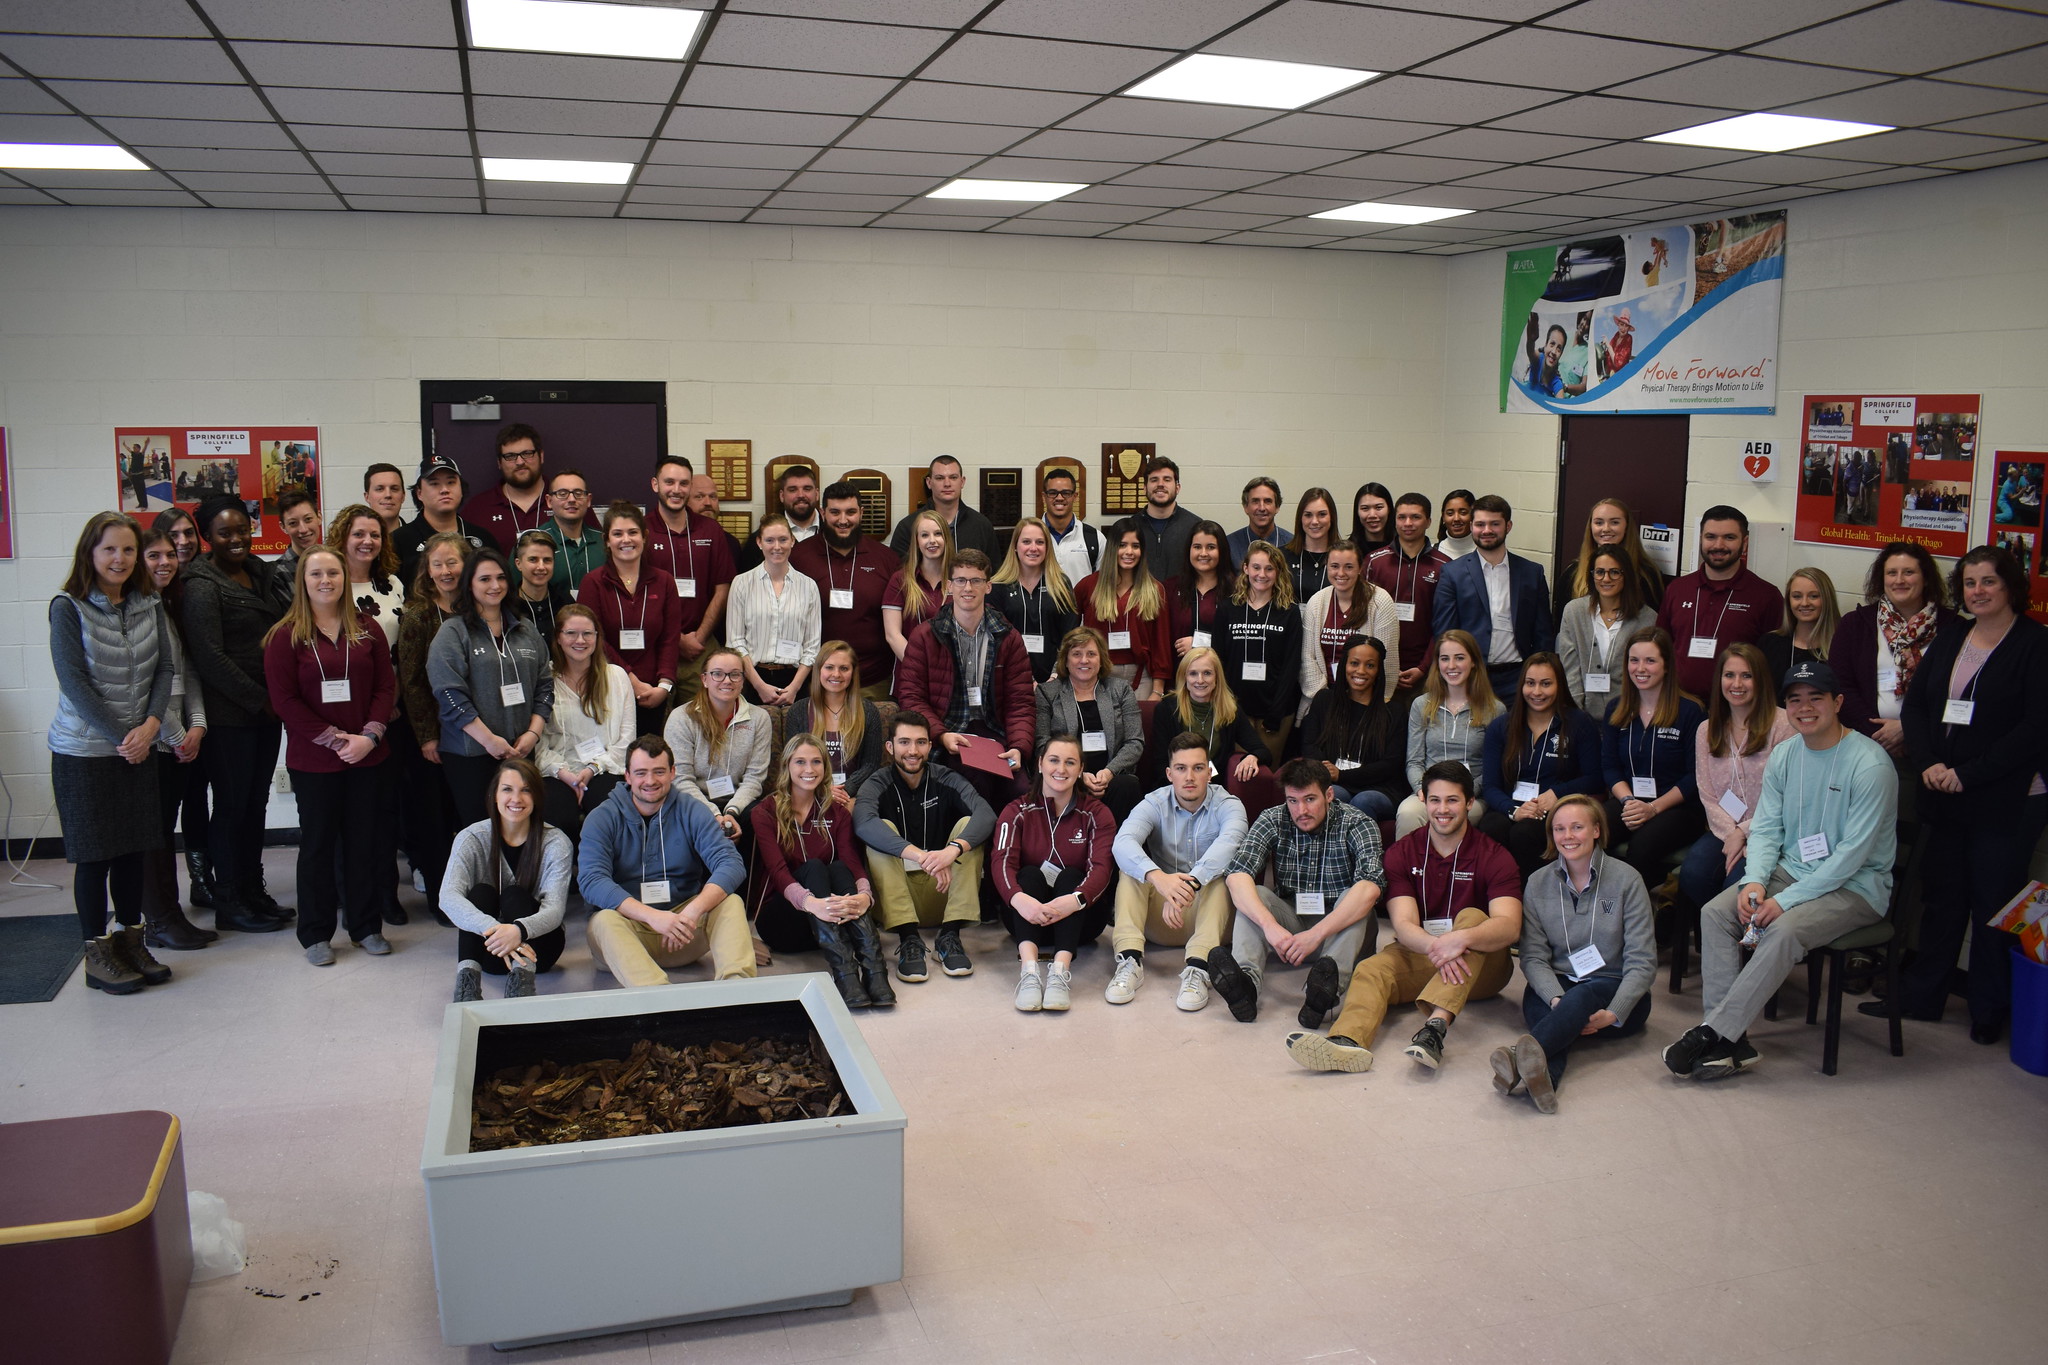 A group image from the 2019 AASP Northeast Regional Conference